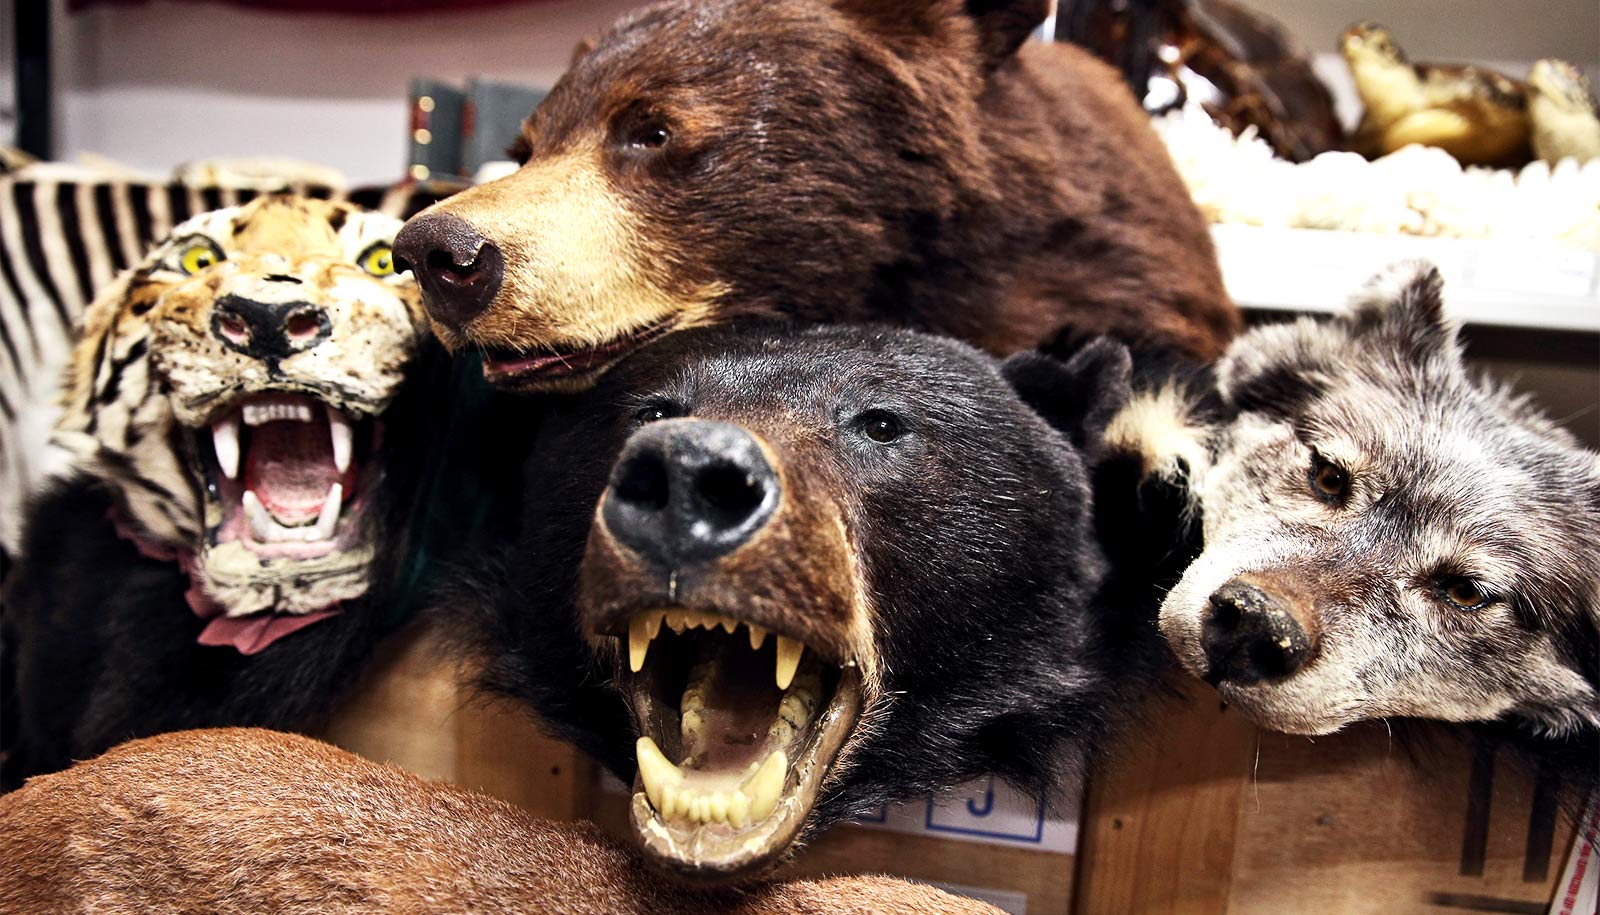 With bear trophies and lion genitals, US wildlife trafficking booms -  Futurity